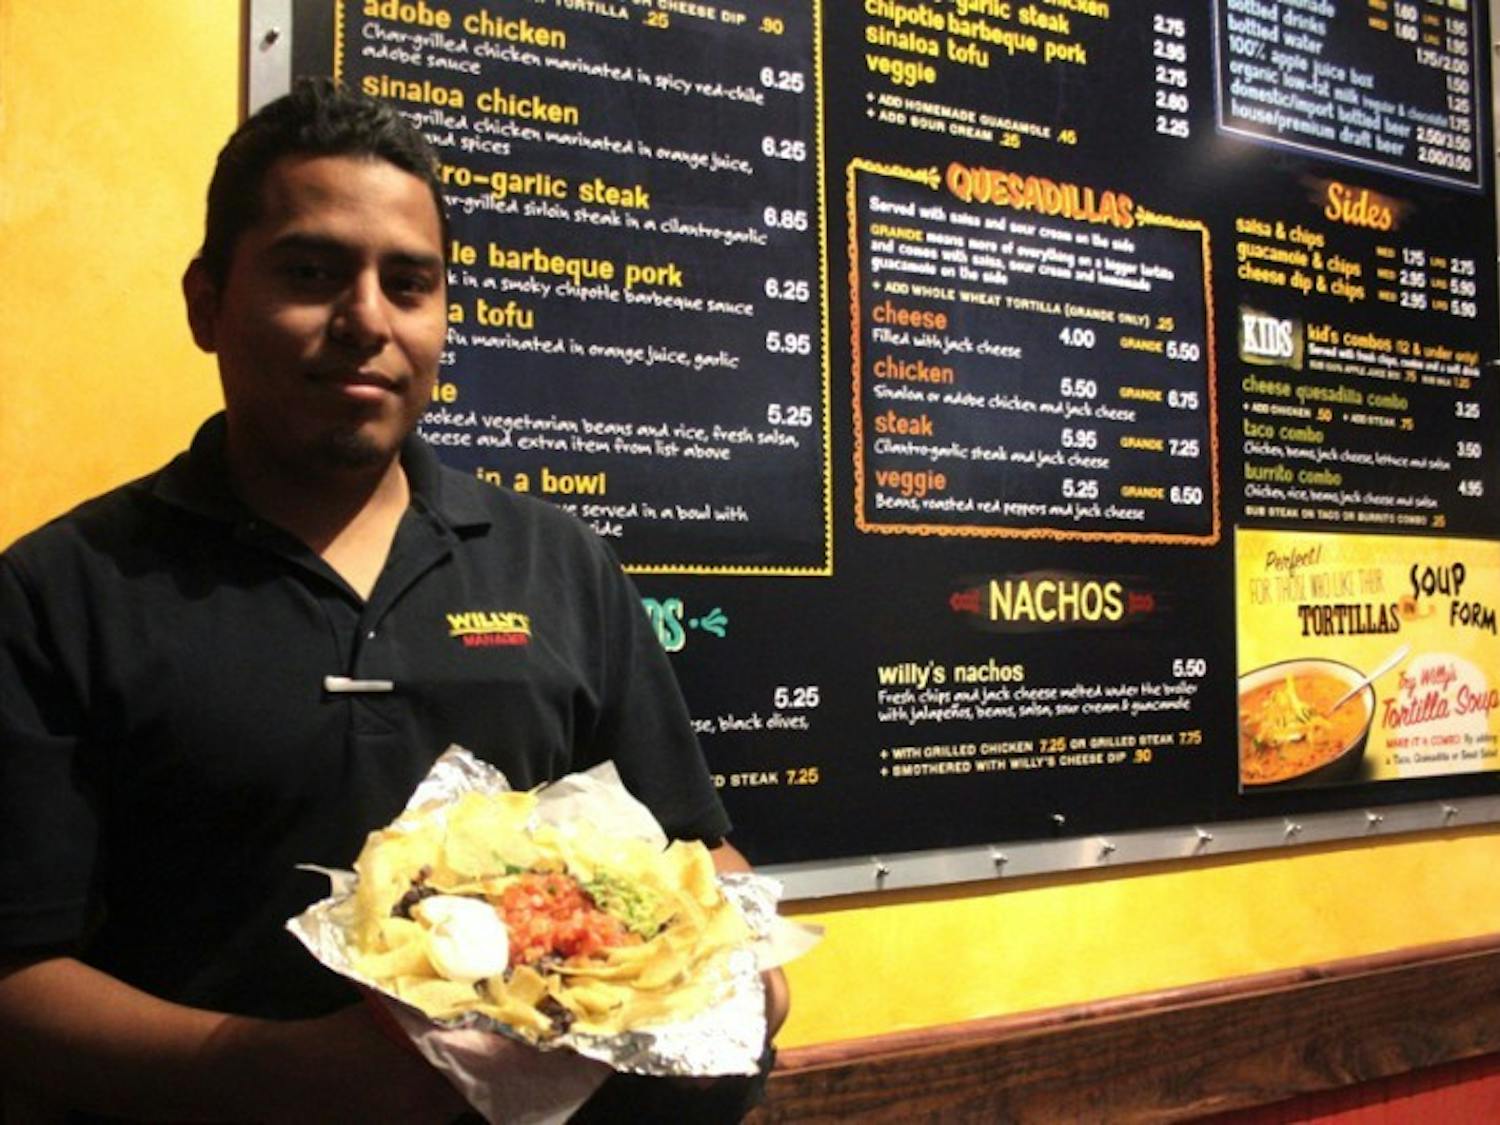 Try Willy's as an alternative to the other Mexican restaurants for a fresh taste.